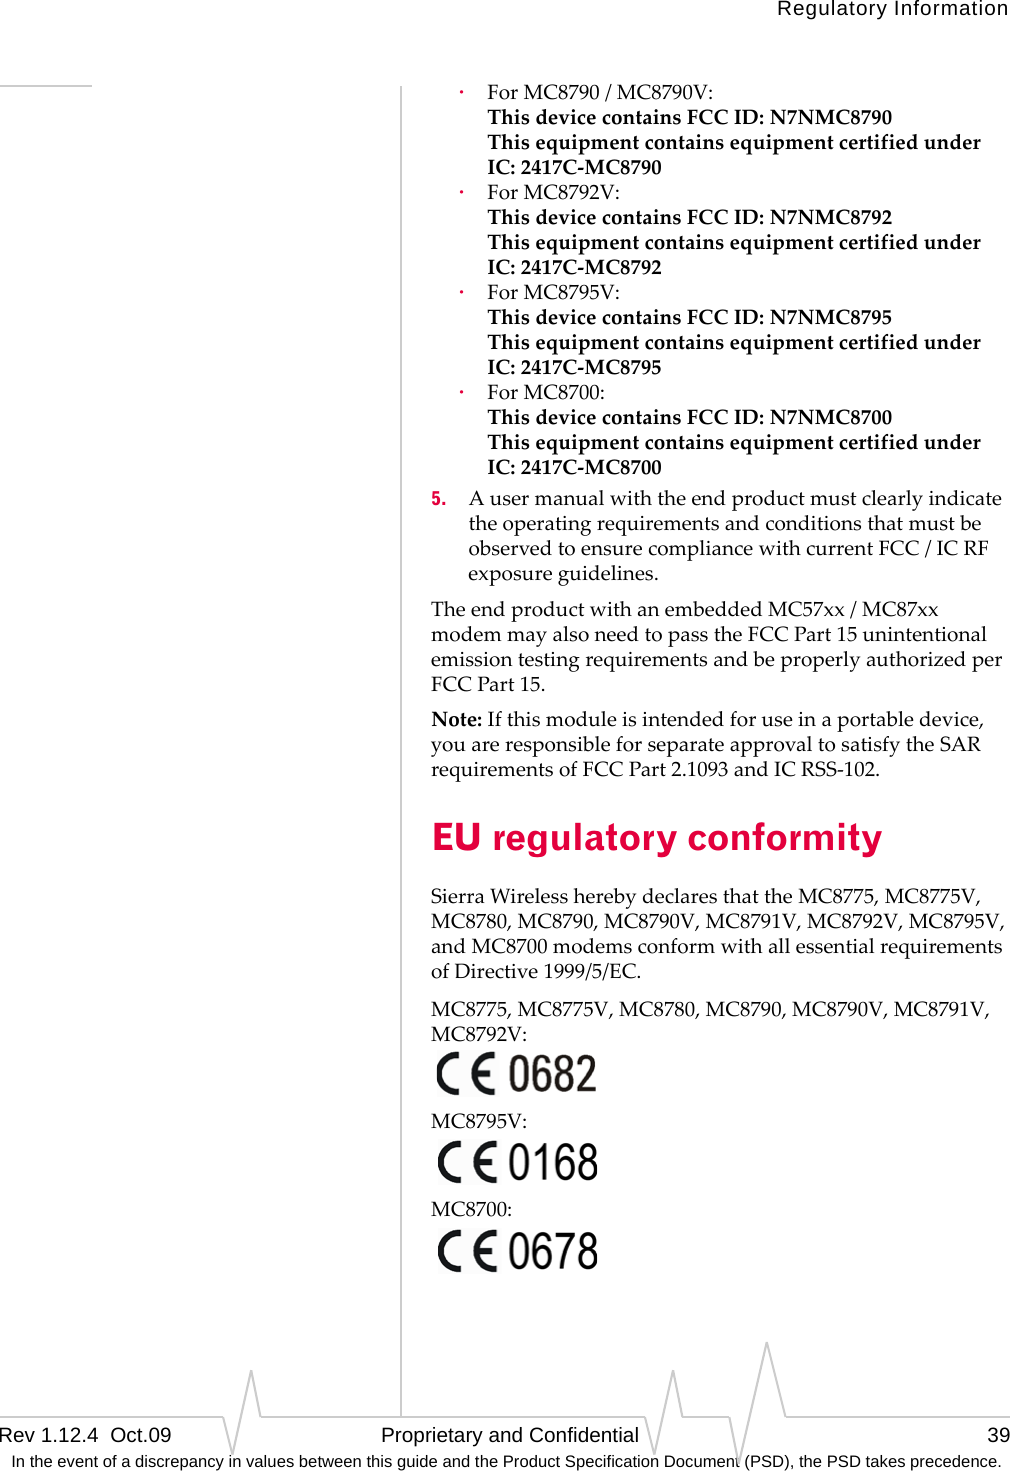 Regulatory InformationRev 1.12.4  Oct.09   Proprietary and Confidential 39 In the event of a discrepancy in values between this guide and the Product Specification Document (PSD), the PSD takes precedence.·ForMC8790/MC8790V: ThisdevicecontainsFCCID:N7NMC8790 ThisequipmentcontainsequipmentcertifiedunderIC:2417C‐MC8790·ForMC8792V: ThisdevicecontainsFCCID:N7NMC8792 ThisequipmentcontainsequipmentcertifiedunderIC:2417C‐MC8792·ForMC8795V: ThisdevicecontainsFCCID:N7NMC8795 ThisequipmentcontainsequipmentcertifiedunderIC:2417C‐MC8795·ForMC8700: ThisdevicecontainsFCCID:N7NMC8700 ThisequipmentcontainsequipmentcertifiedunderIC:2417C‐MC87005. AusermanualwiththeendproductmustclearlyindicatetheoperatingrequirementsandconditionsthatmustbeobservedtoensurecompliancewithcurrentFCC/ICRFexposureguidelines.TheendproductwithanembeddedMC57xx/MC87xxmodemmayalsoneedtopasstheFCCPart15unintentionalemissiontestingrequirementsandbeproperlyauthorizedperFCCPart15.Note:Ifthismoduleisintendedforuseinaportabledevice,youareresponsibleforseparateapprovaltosatisfytheSARrequirementsofFCCPart2.1093andICRSS‐102.EU regulatory conformitySierraWirelessherebydeclaresthattheMC8775,MC8775V,MC8780,MC8790,MC8790V,MC8791V,MC8792V,MC8795V,andMC8700modemsconformwithallessentialrequirementsofDirective1999/5/EC.MC8775,MC8775V,MC8780,MC8790,MC8790V,MC8791V,MC8792V:MC8795V:MC8700: